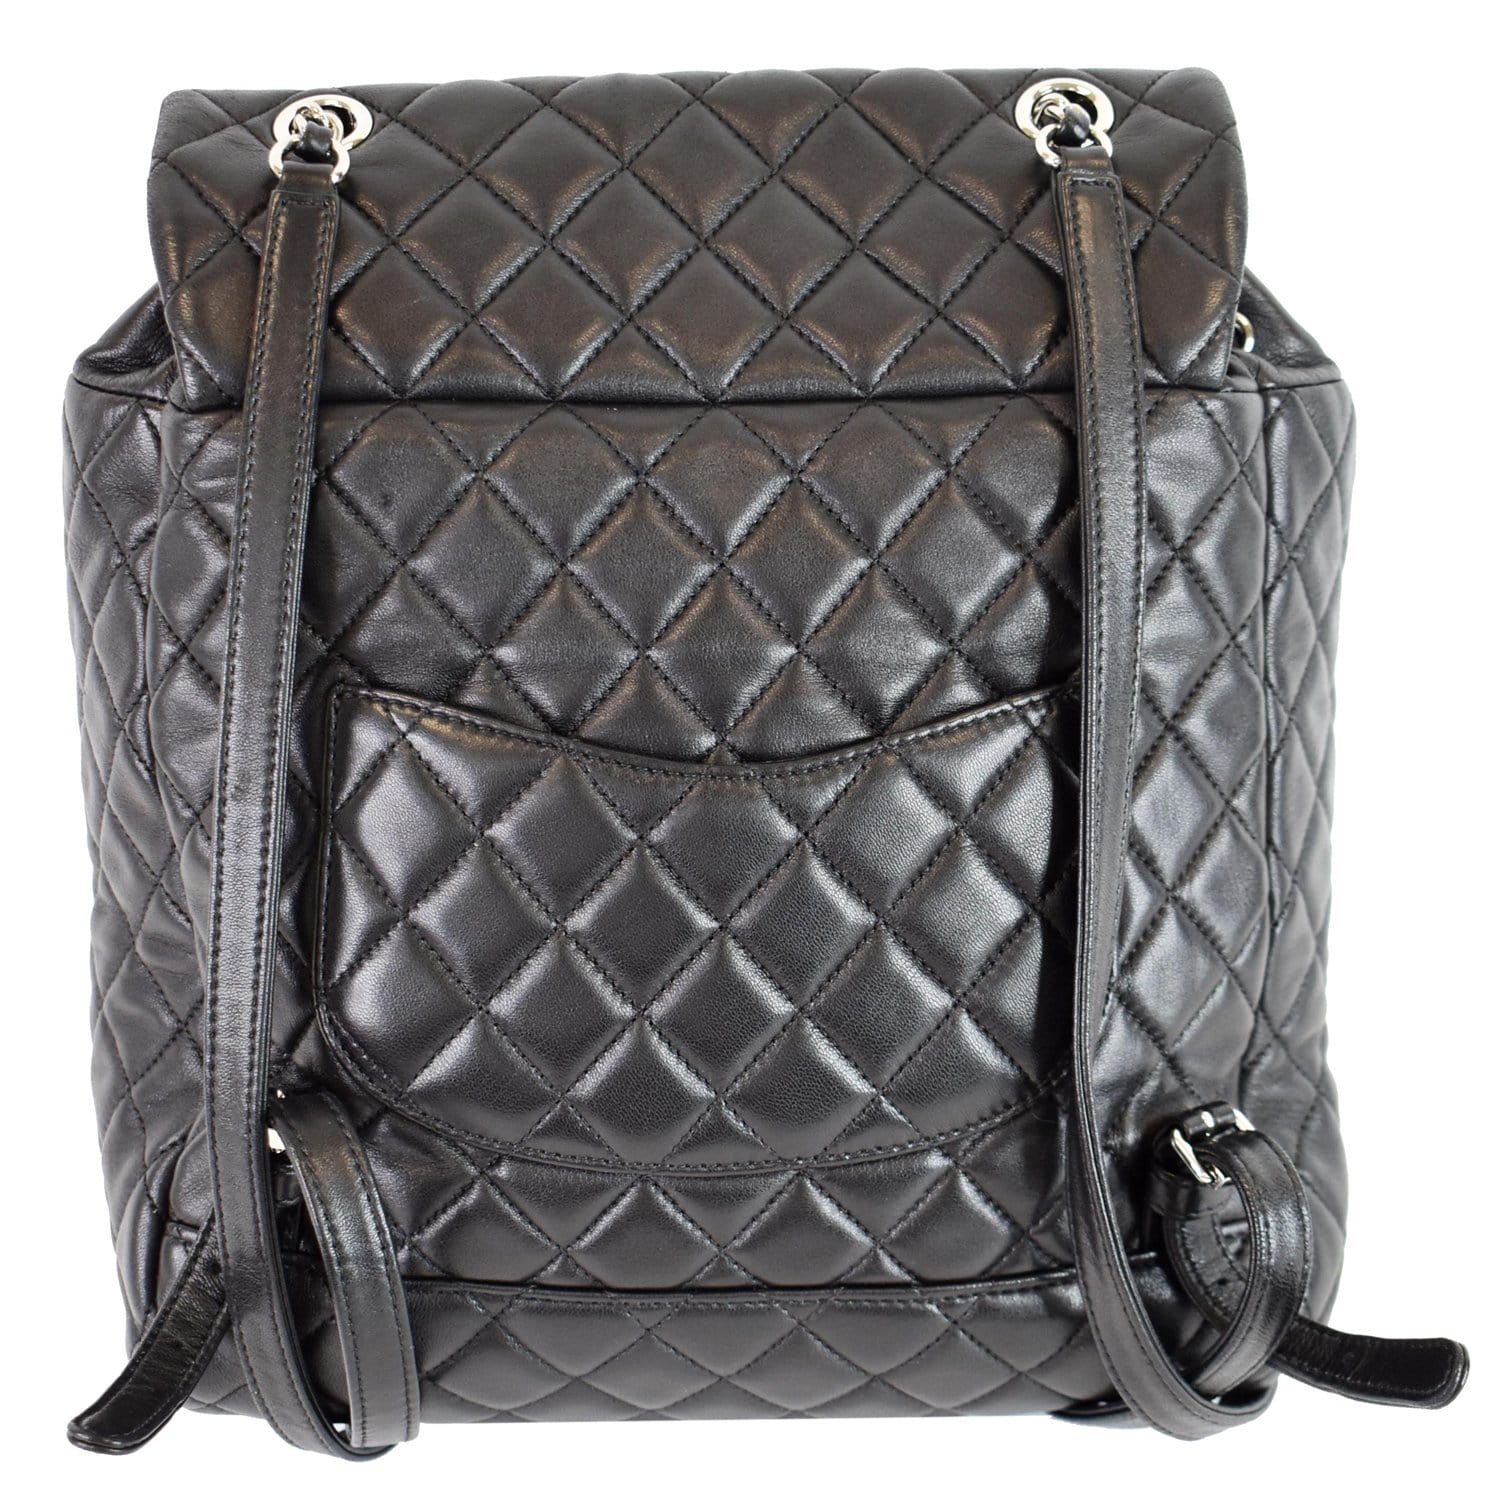 CHANEL Lambskin Quilted Large Urban Spirit Backpack Black 205239